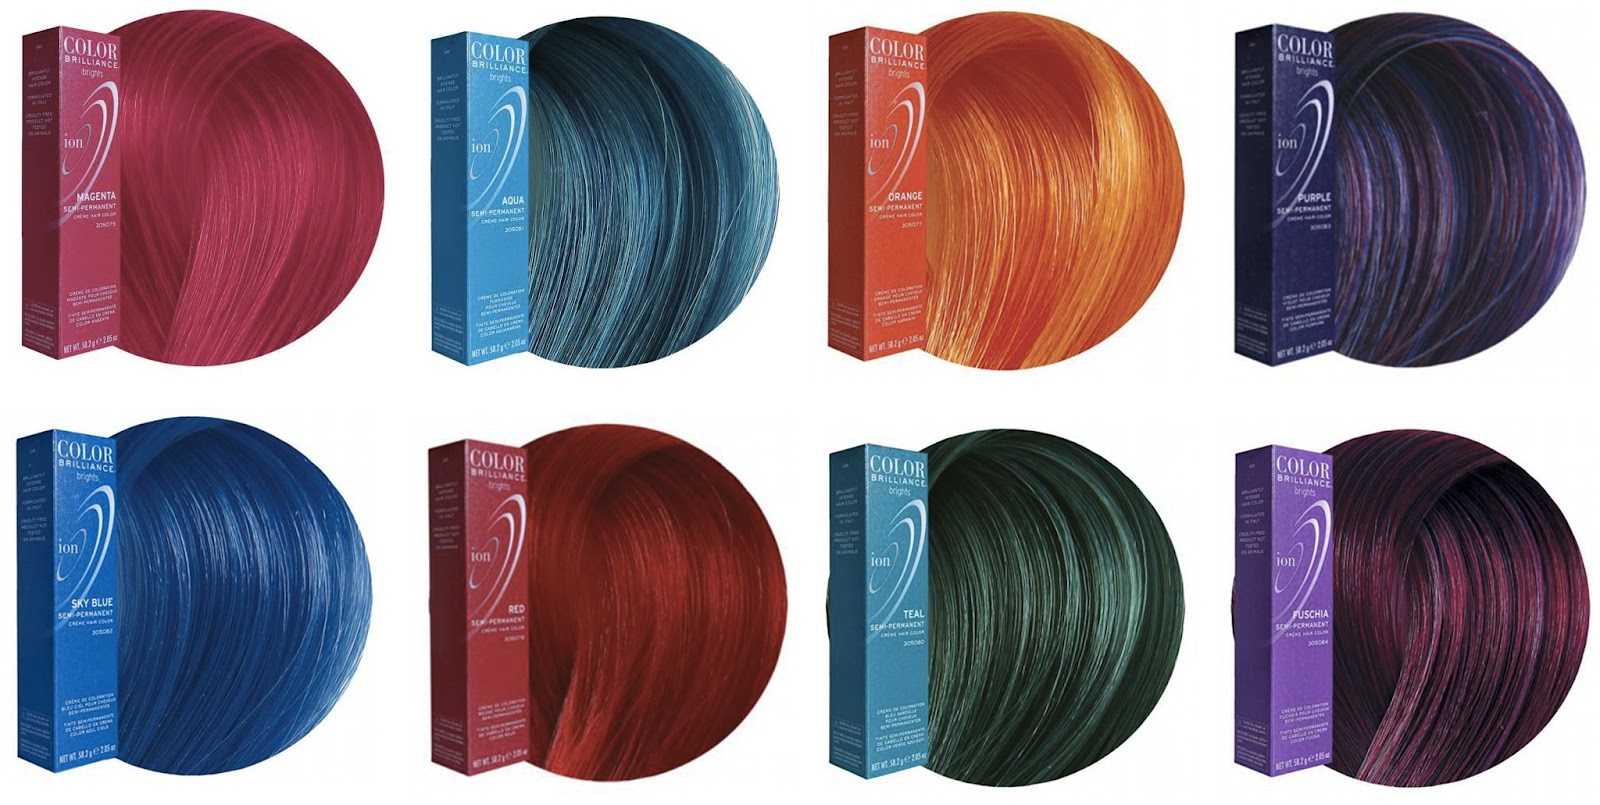 3. Ion Color Brilliance Semi-Permanent Brights Hair Color in Shark Blue - wide 5